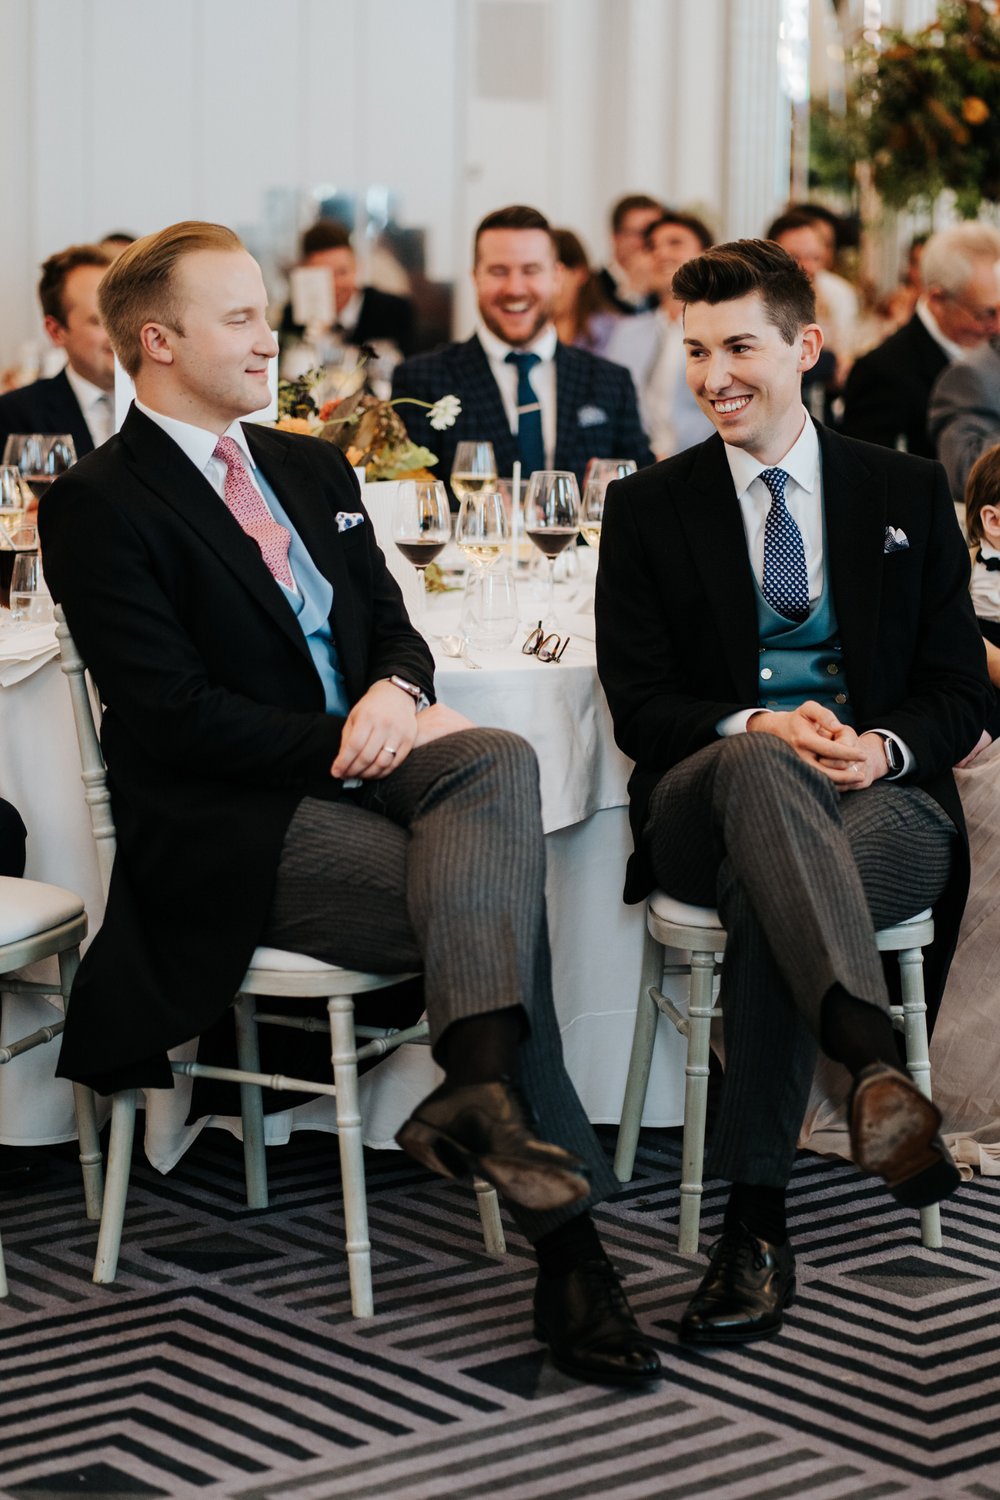 William Hanson and Michael Worrall sit cross-legged and smile at each other during wedding speeches at Claridge's